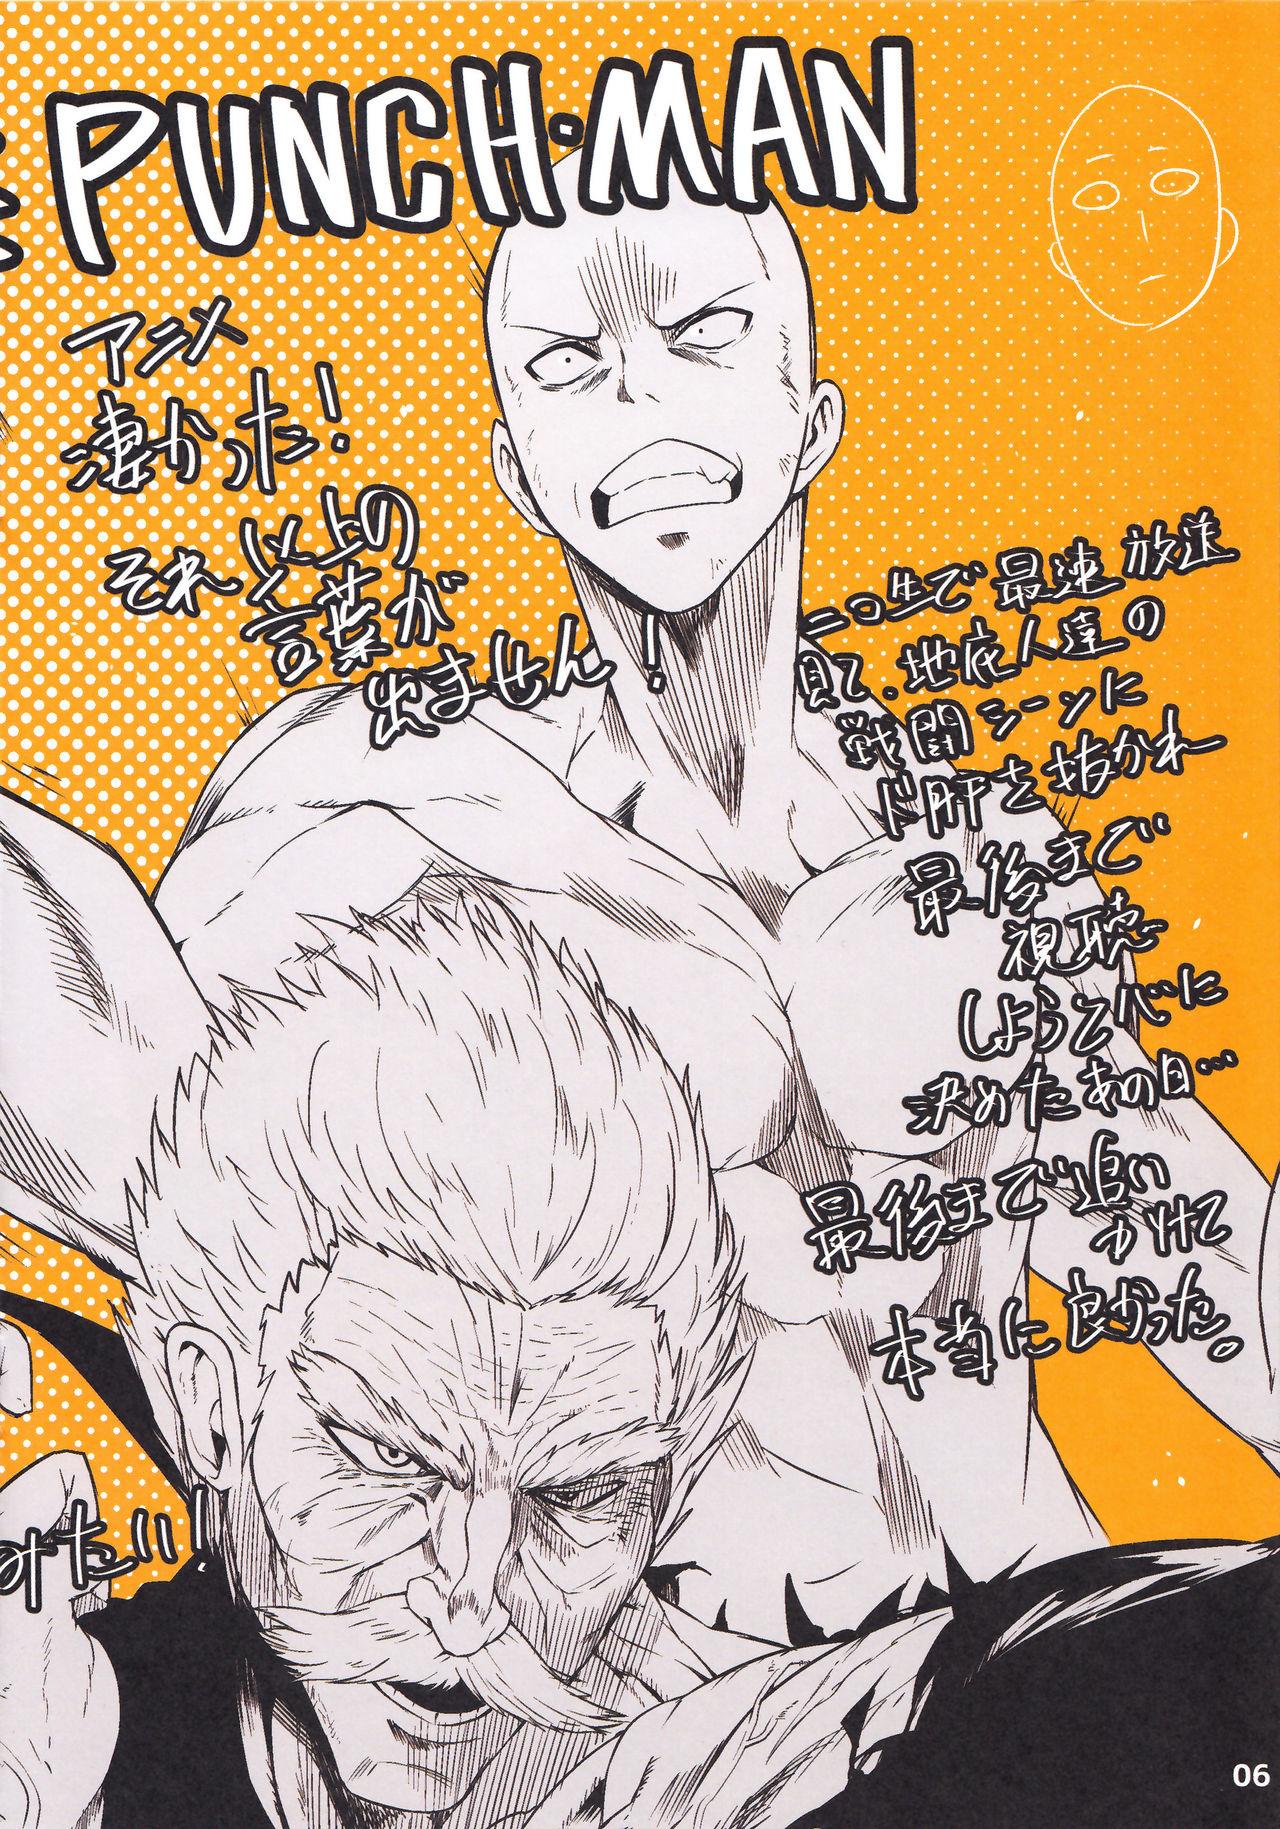 Dick Suckers RORINOUTAGE DROWINGBOOK - One punch man Hot Brunette - Page 8